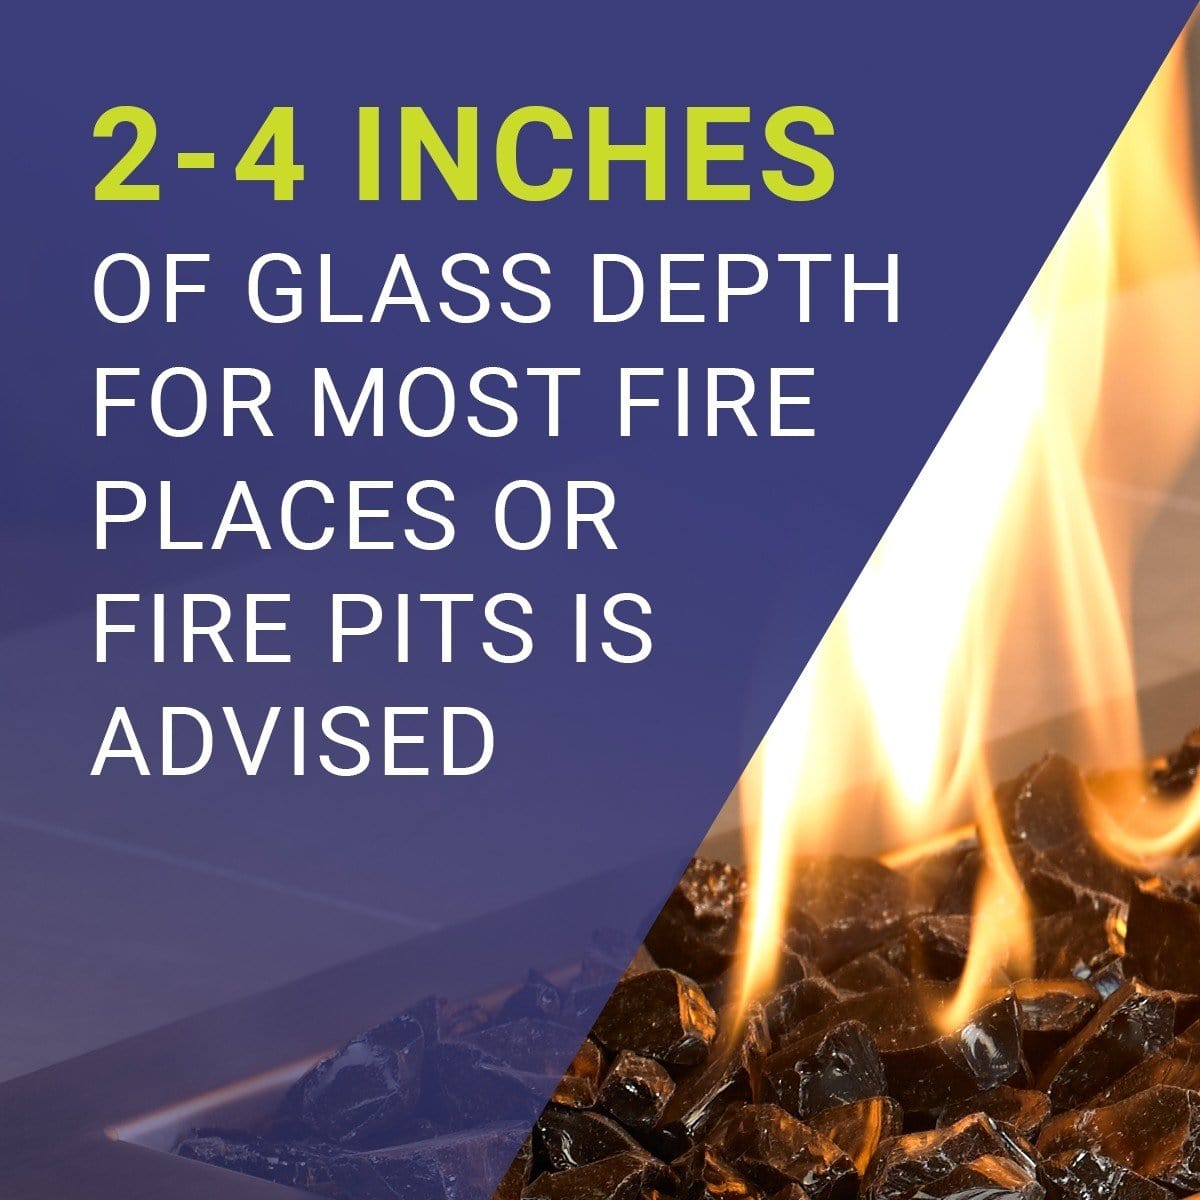 American Fire Glass AFF-GRY-10 1/4-Inch Classic Fire Glass 10-Pounds, Gray